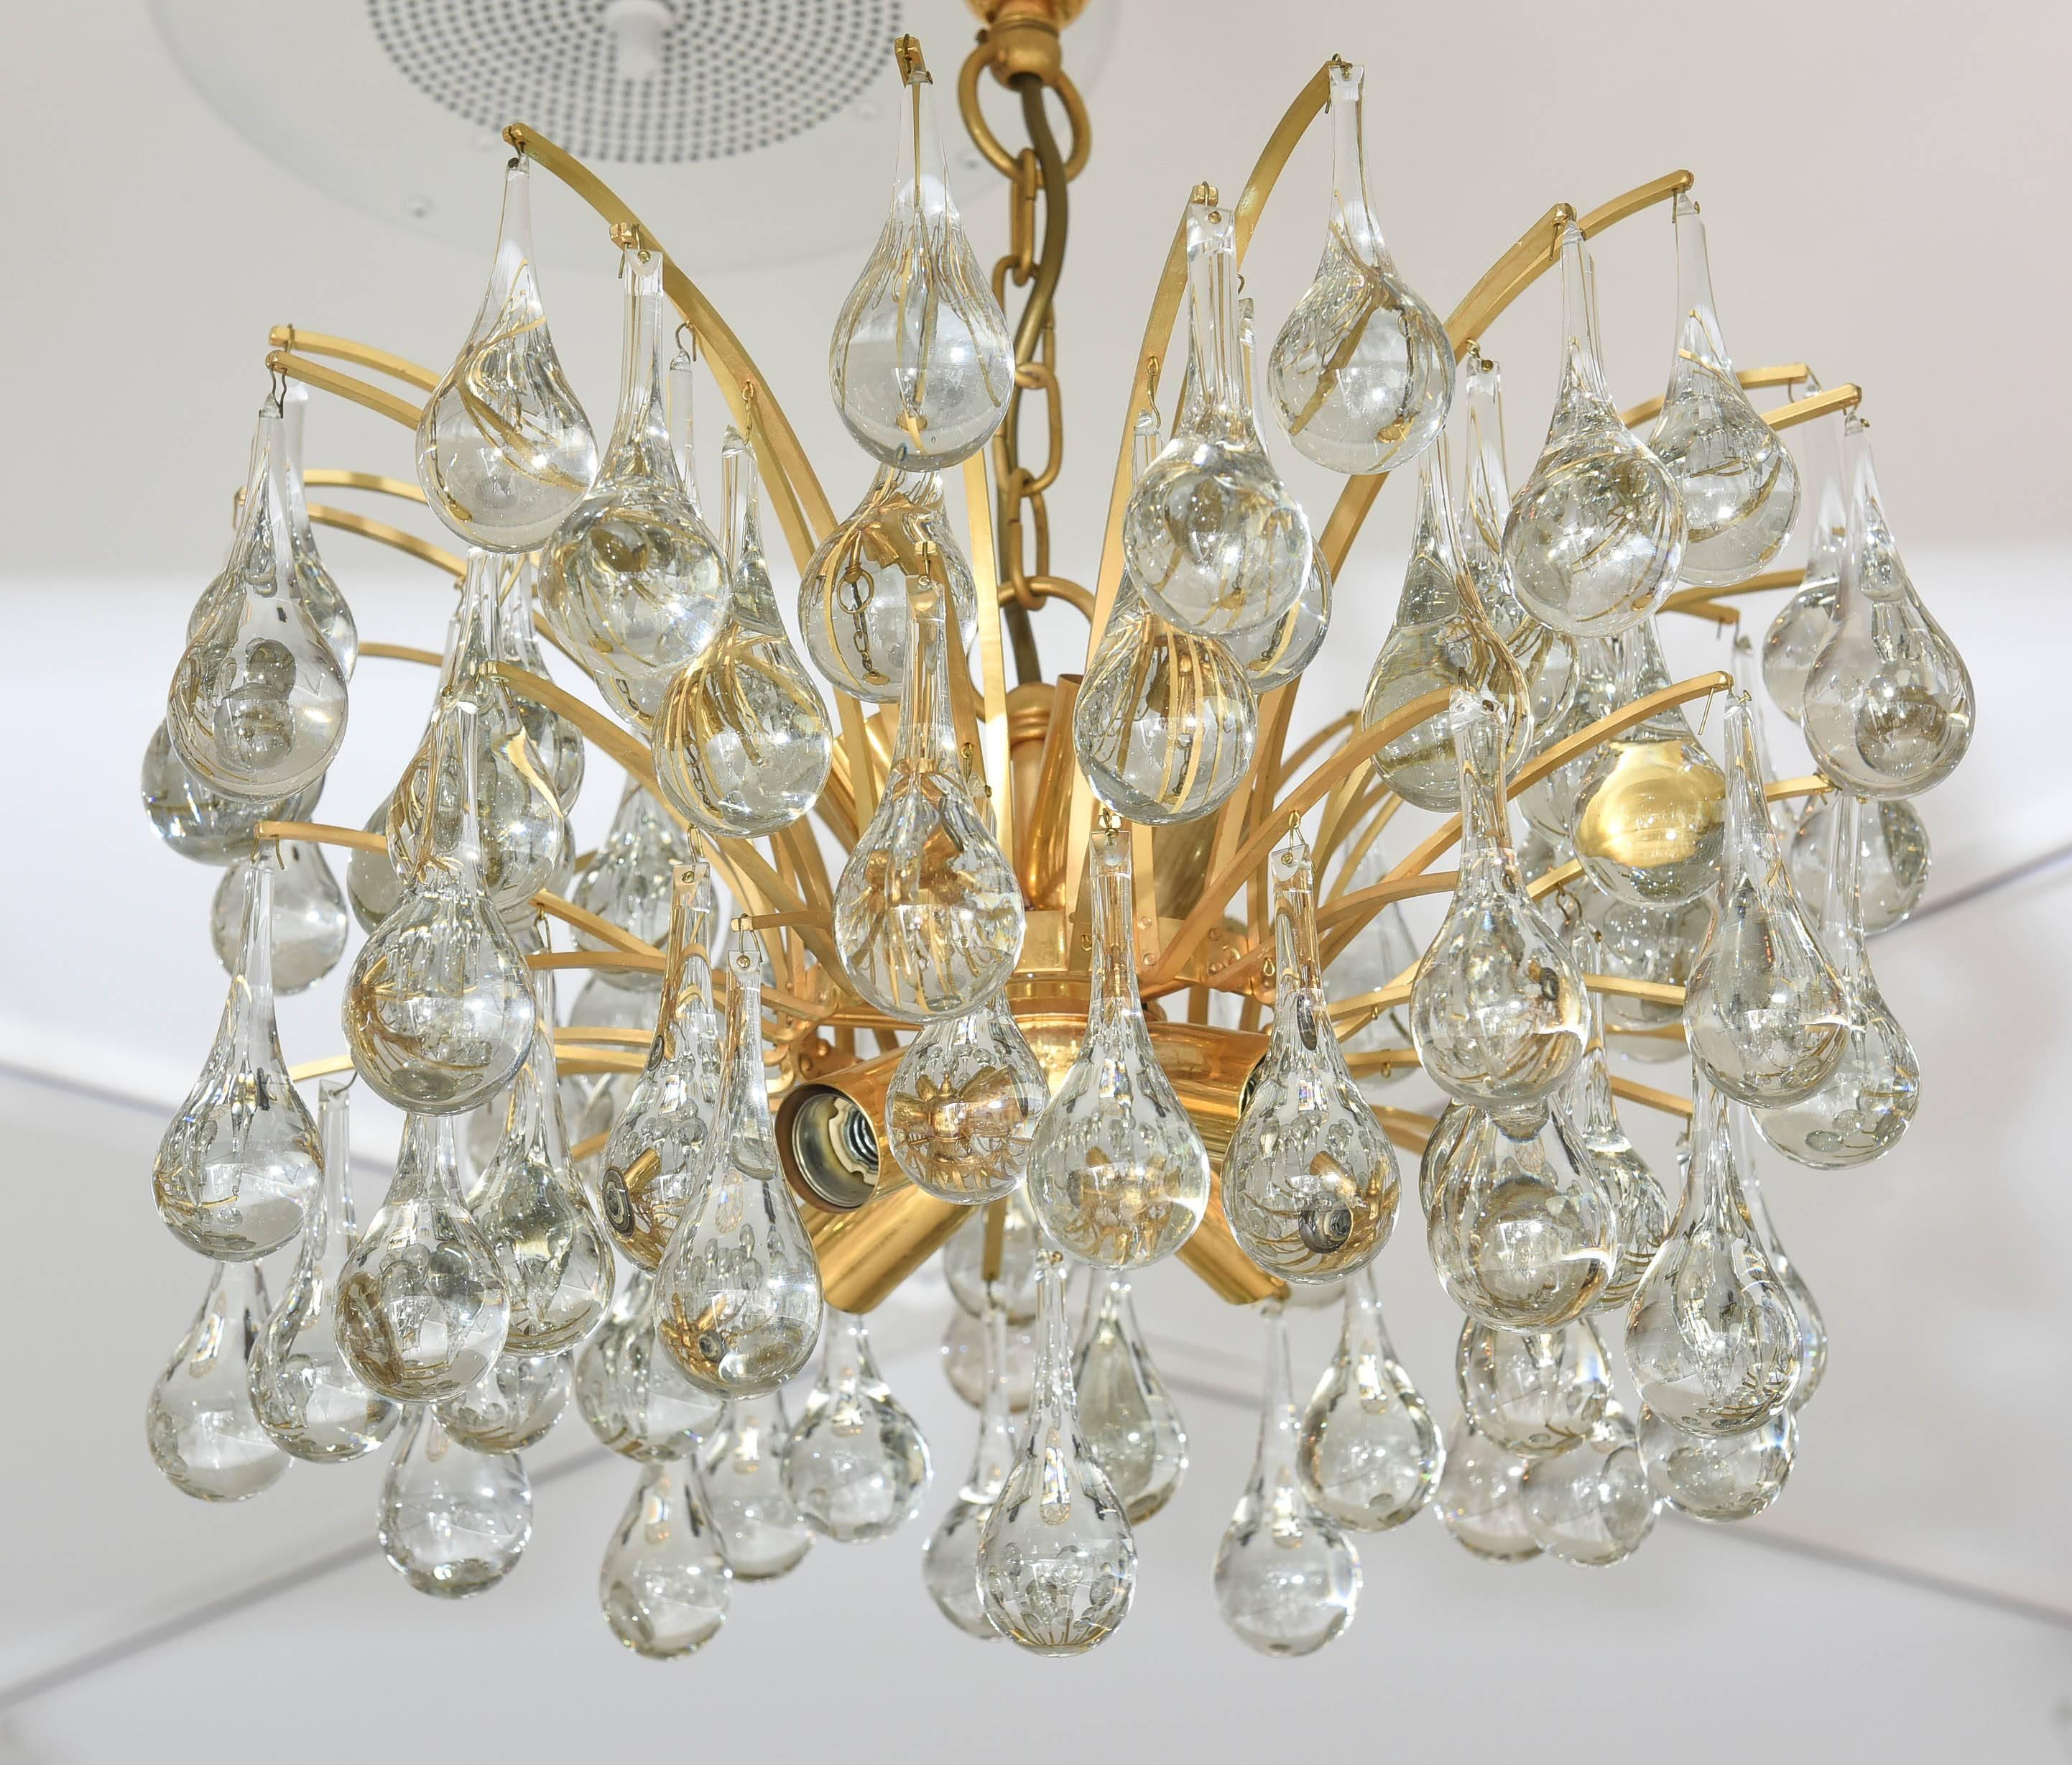 This amazing Hollywood-Regency style chandelier was made in the 1970s by the iconic firm Ernst Palme in the 1970s. The piece is gold-plated and the crystal prisms are in a tear-drop form.

Note: The last three photos will show that there are small